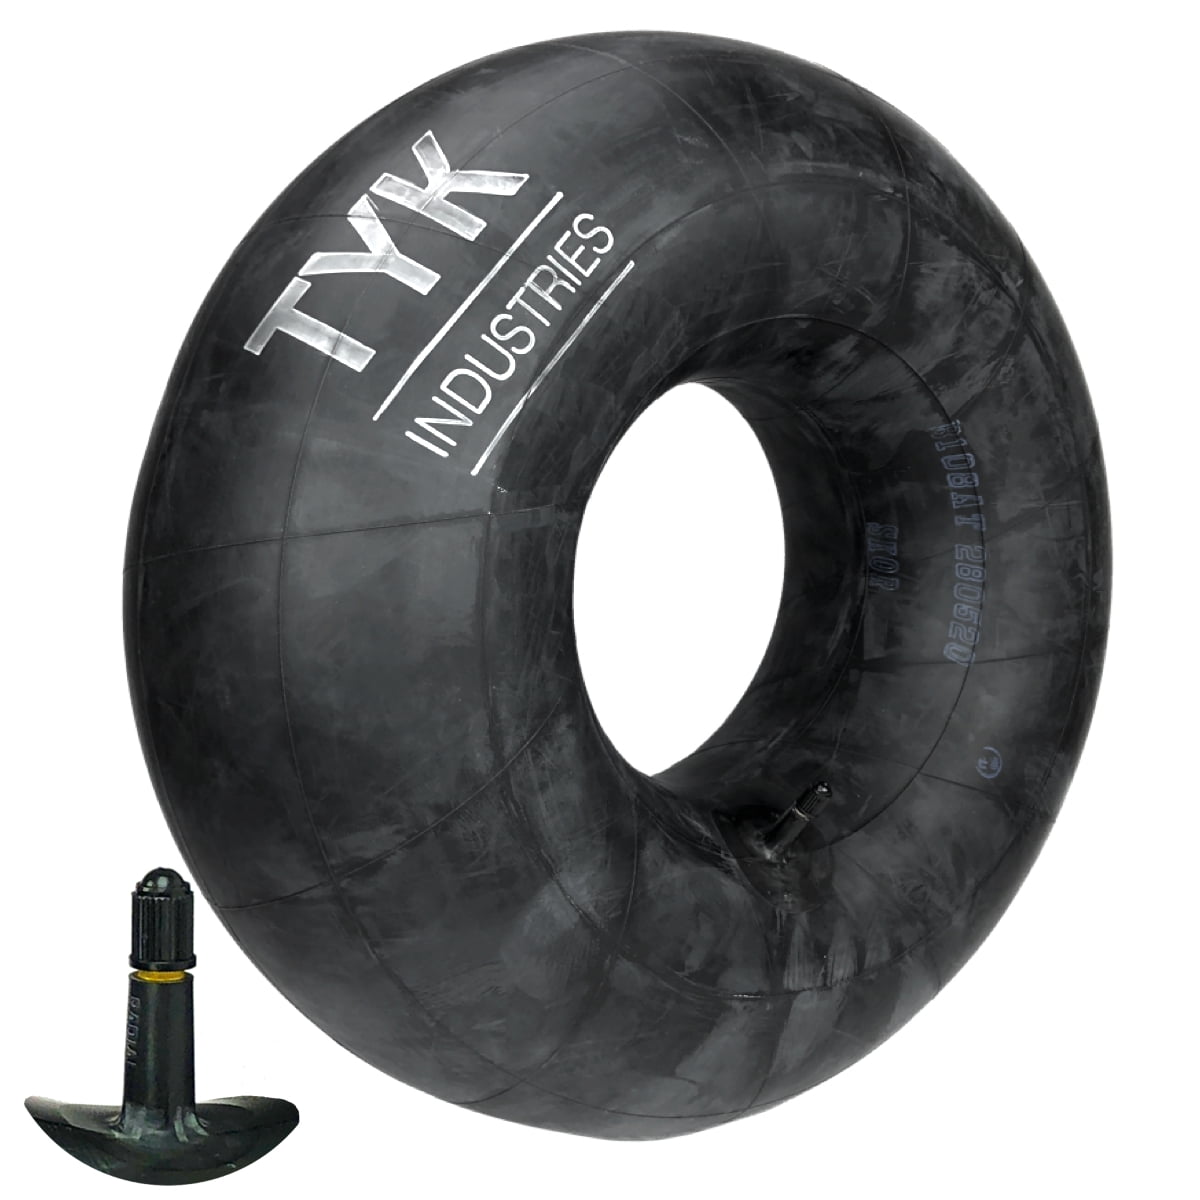 SET OF TWO 5.70x5.00-8 5.70/5.00-8 TR-13 straight stem INNER TUBES.FREE SHIPPING